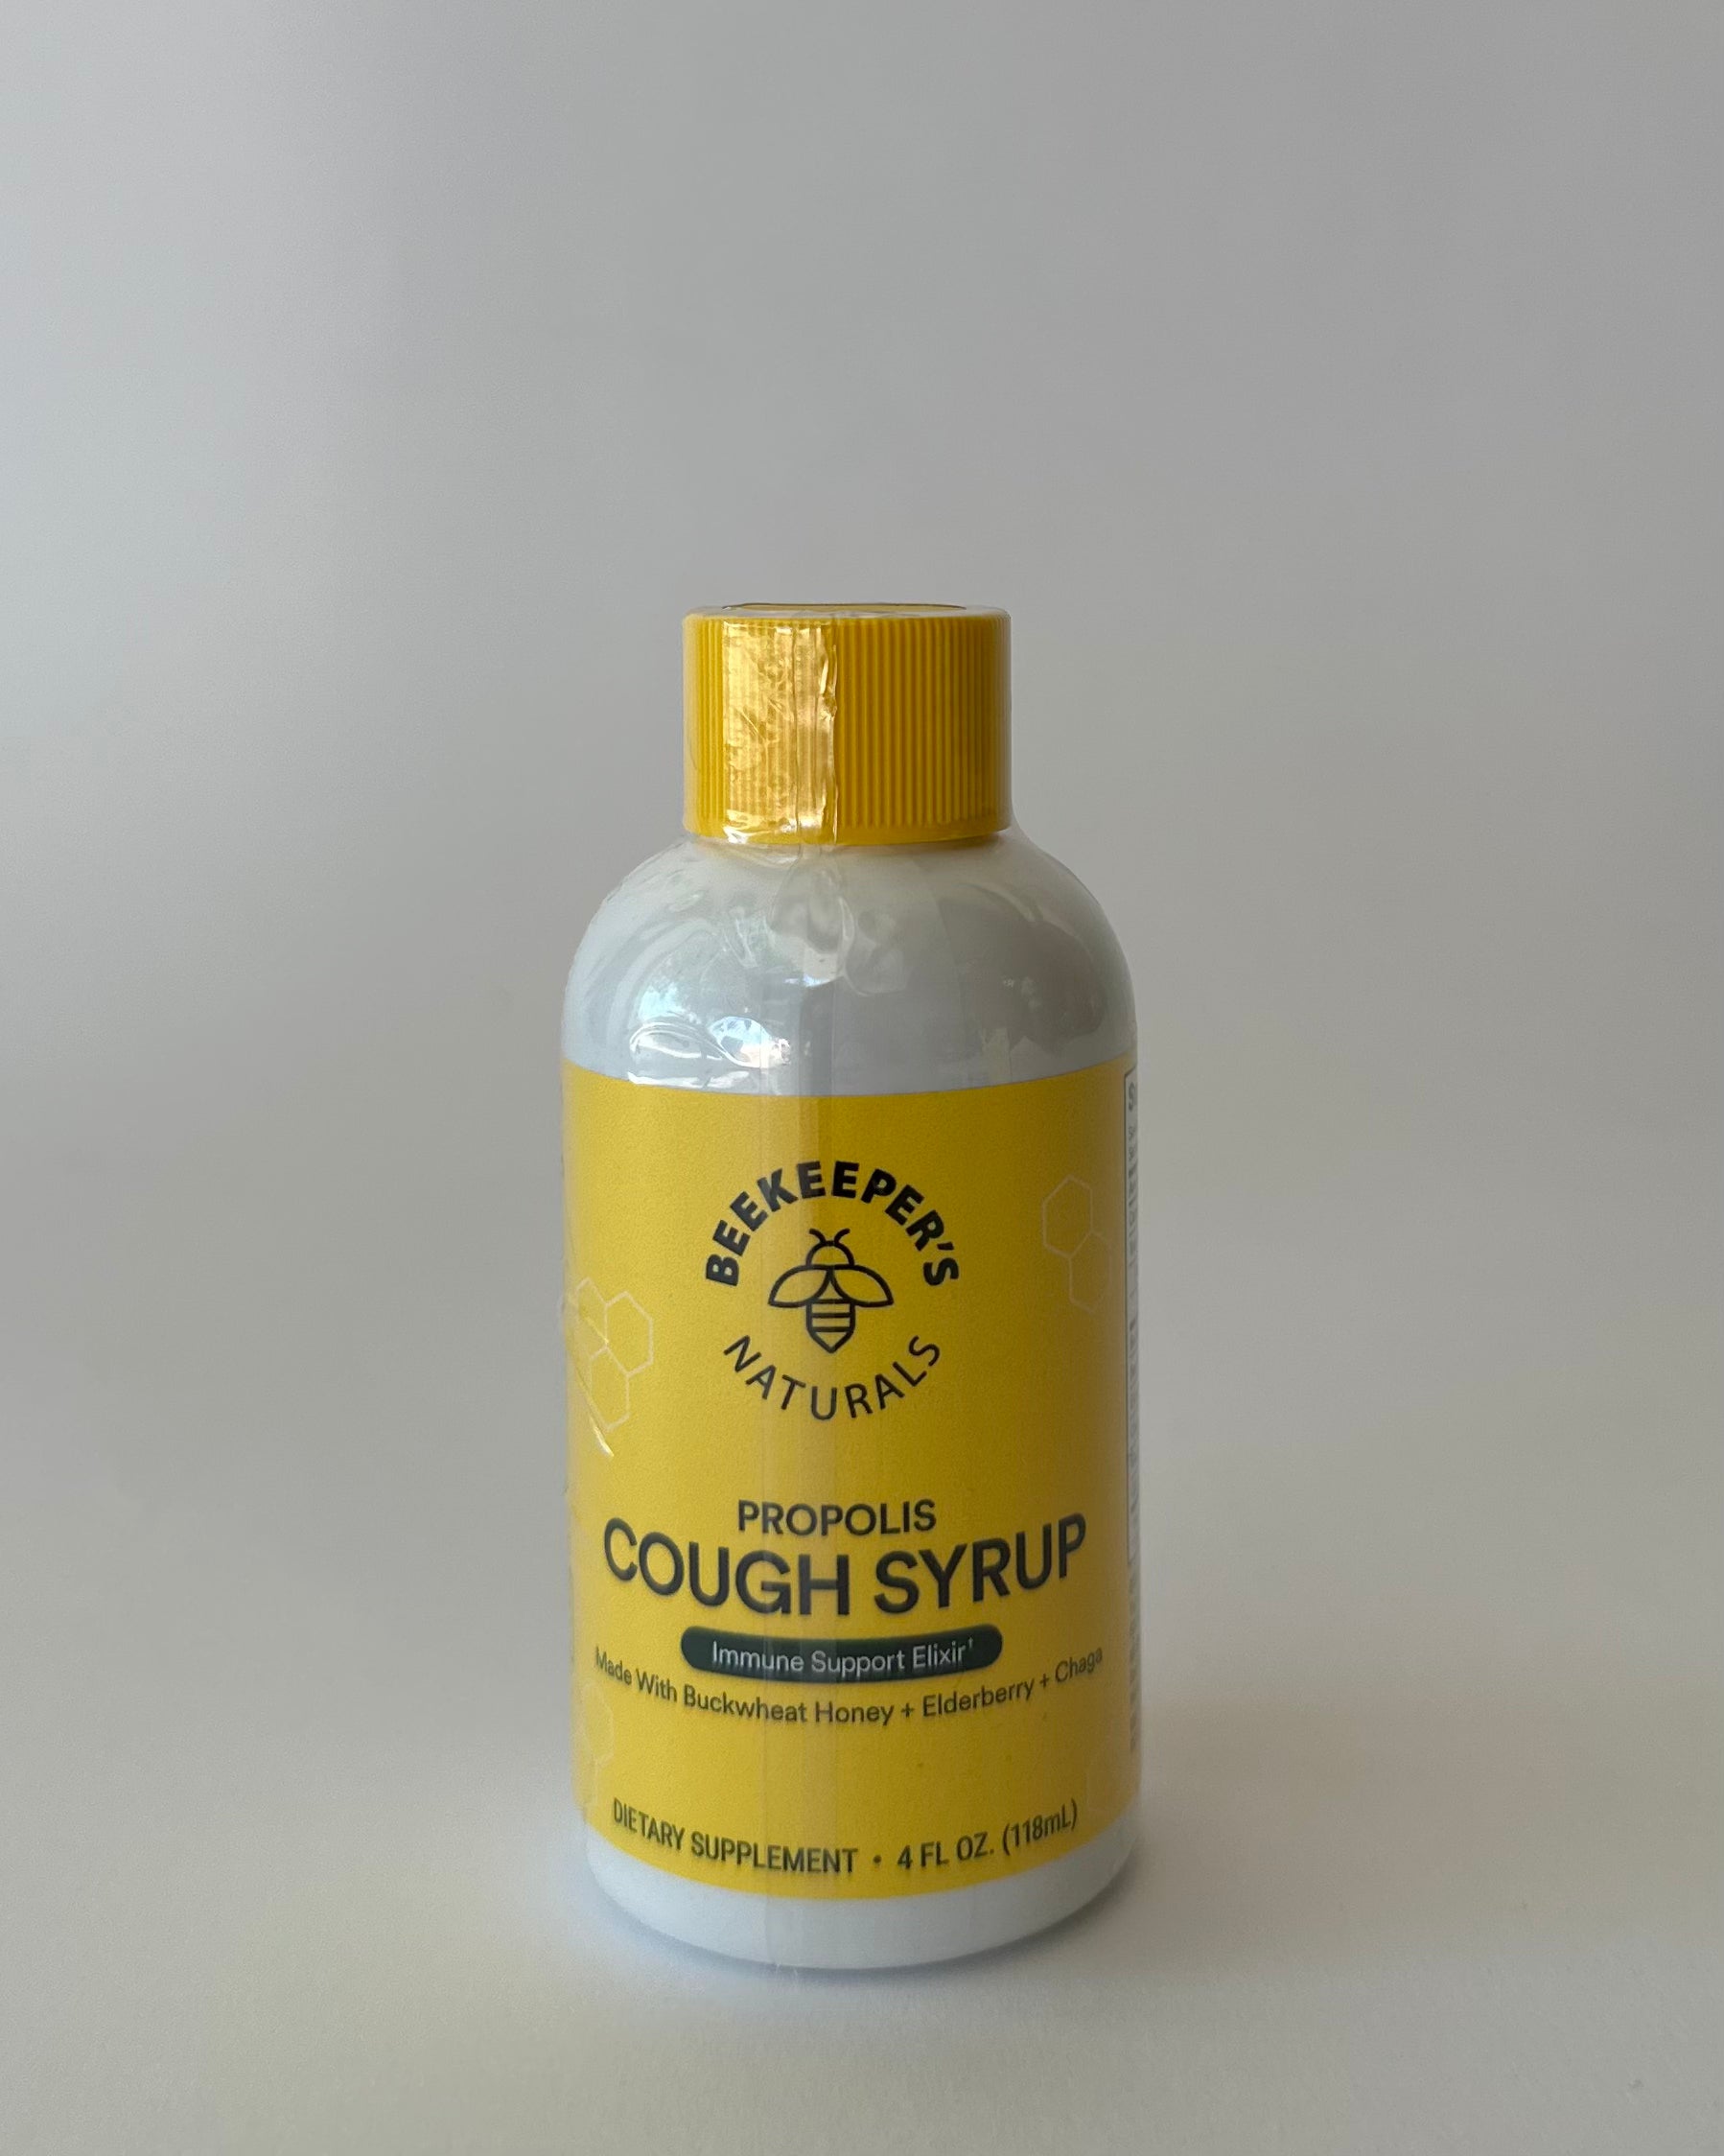 Beekeeper's Naturals - Propolis Cough Syrup